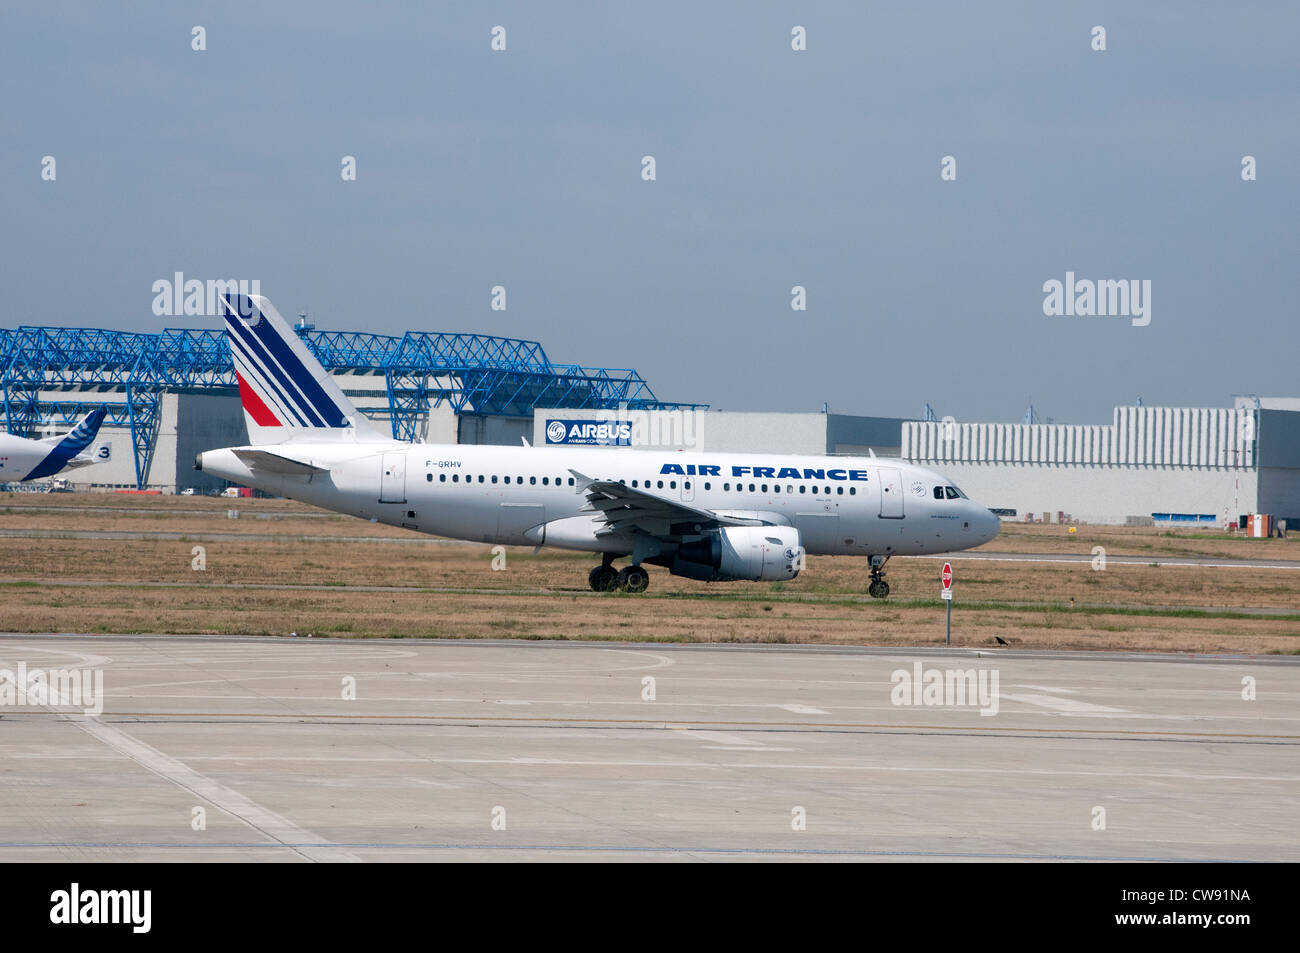 Airbus Industrie HQ in Toulouse France An Airbus A319 aircraft of the Air France fleet on the taxiway Stock Photo